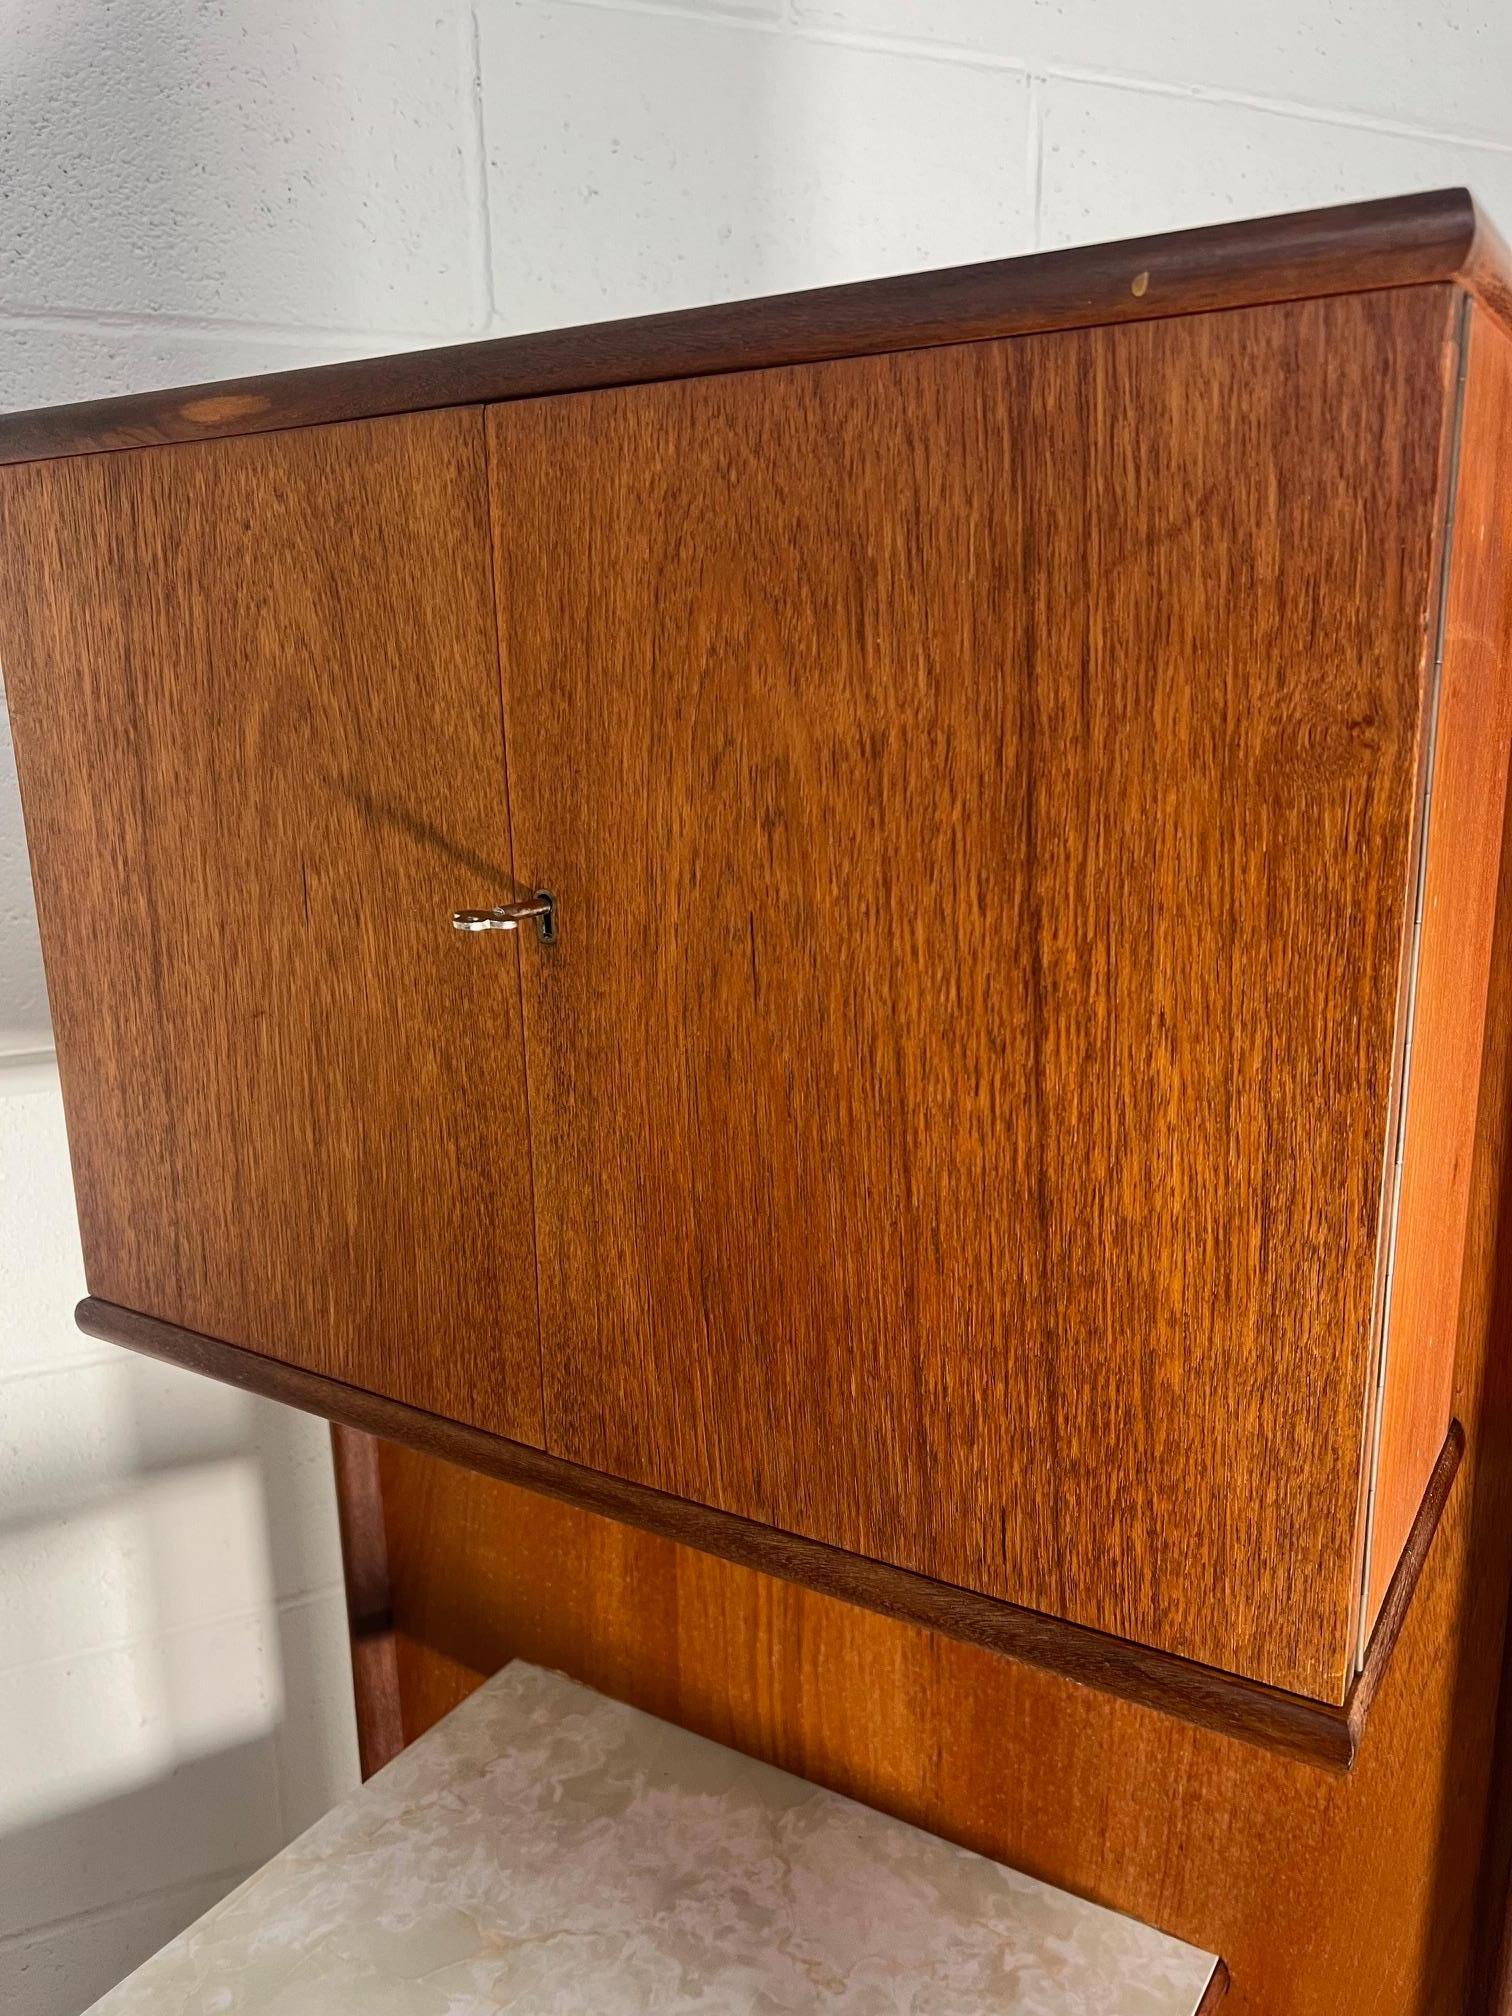 This is an amazing 1970's teak cocktail bar by Turnidge of London. Made in England.

The side panel can be placed on the left or right side. The top has a white marble effect finish.

Very nice condition overall. Some stains on the front and a